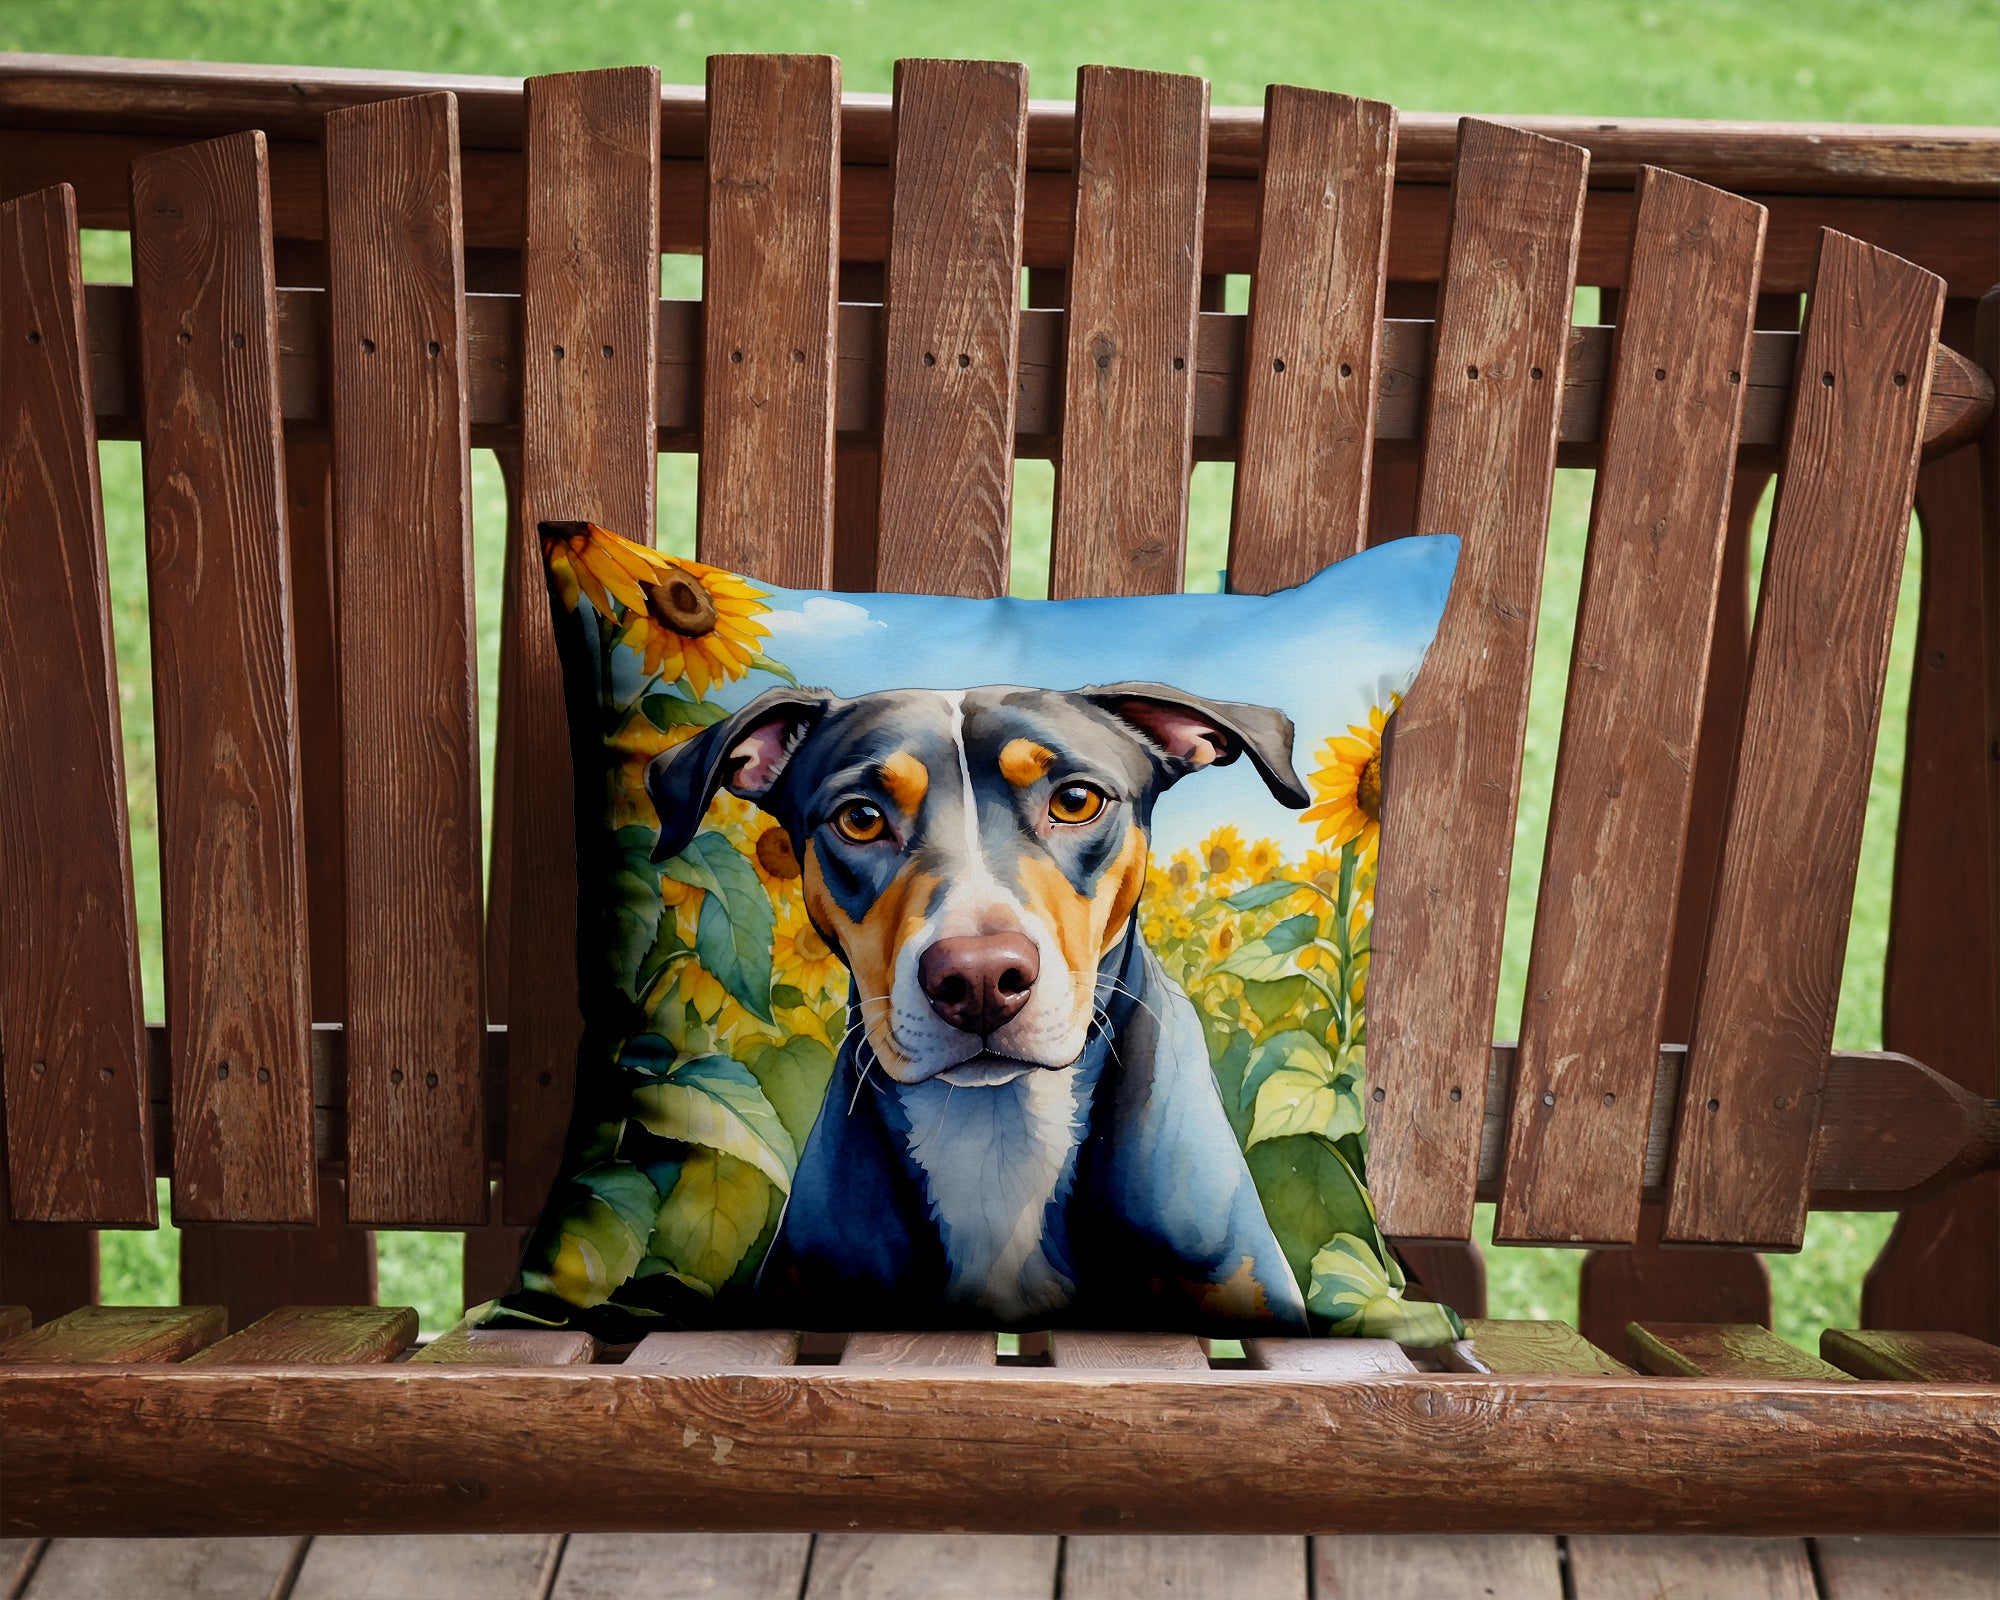 Buy this Catahoula in Sunflowers Throw Pillow